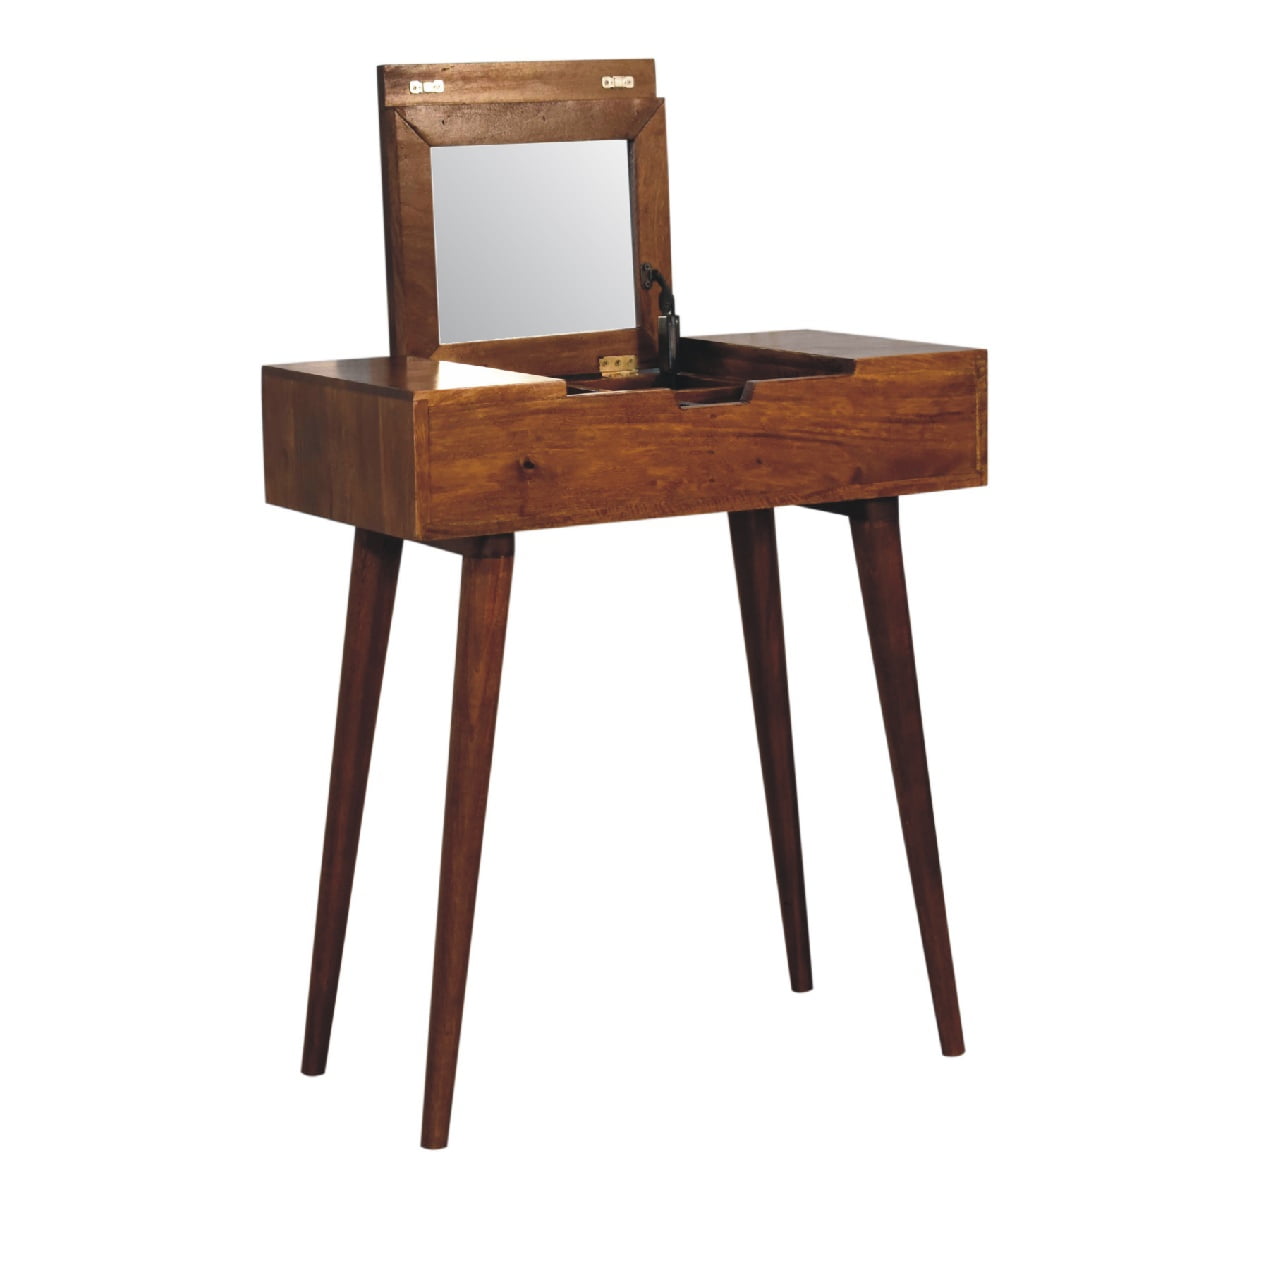 Mini Chestnut Dressing Table with Foldable Mirror